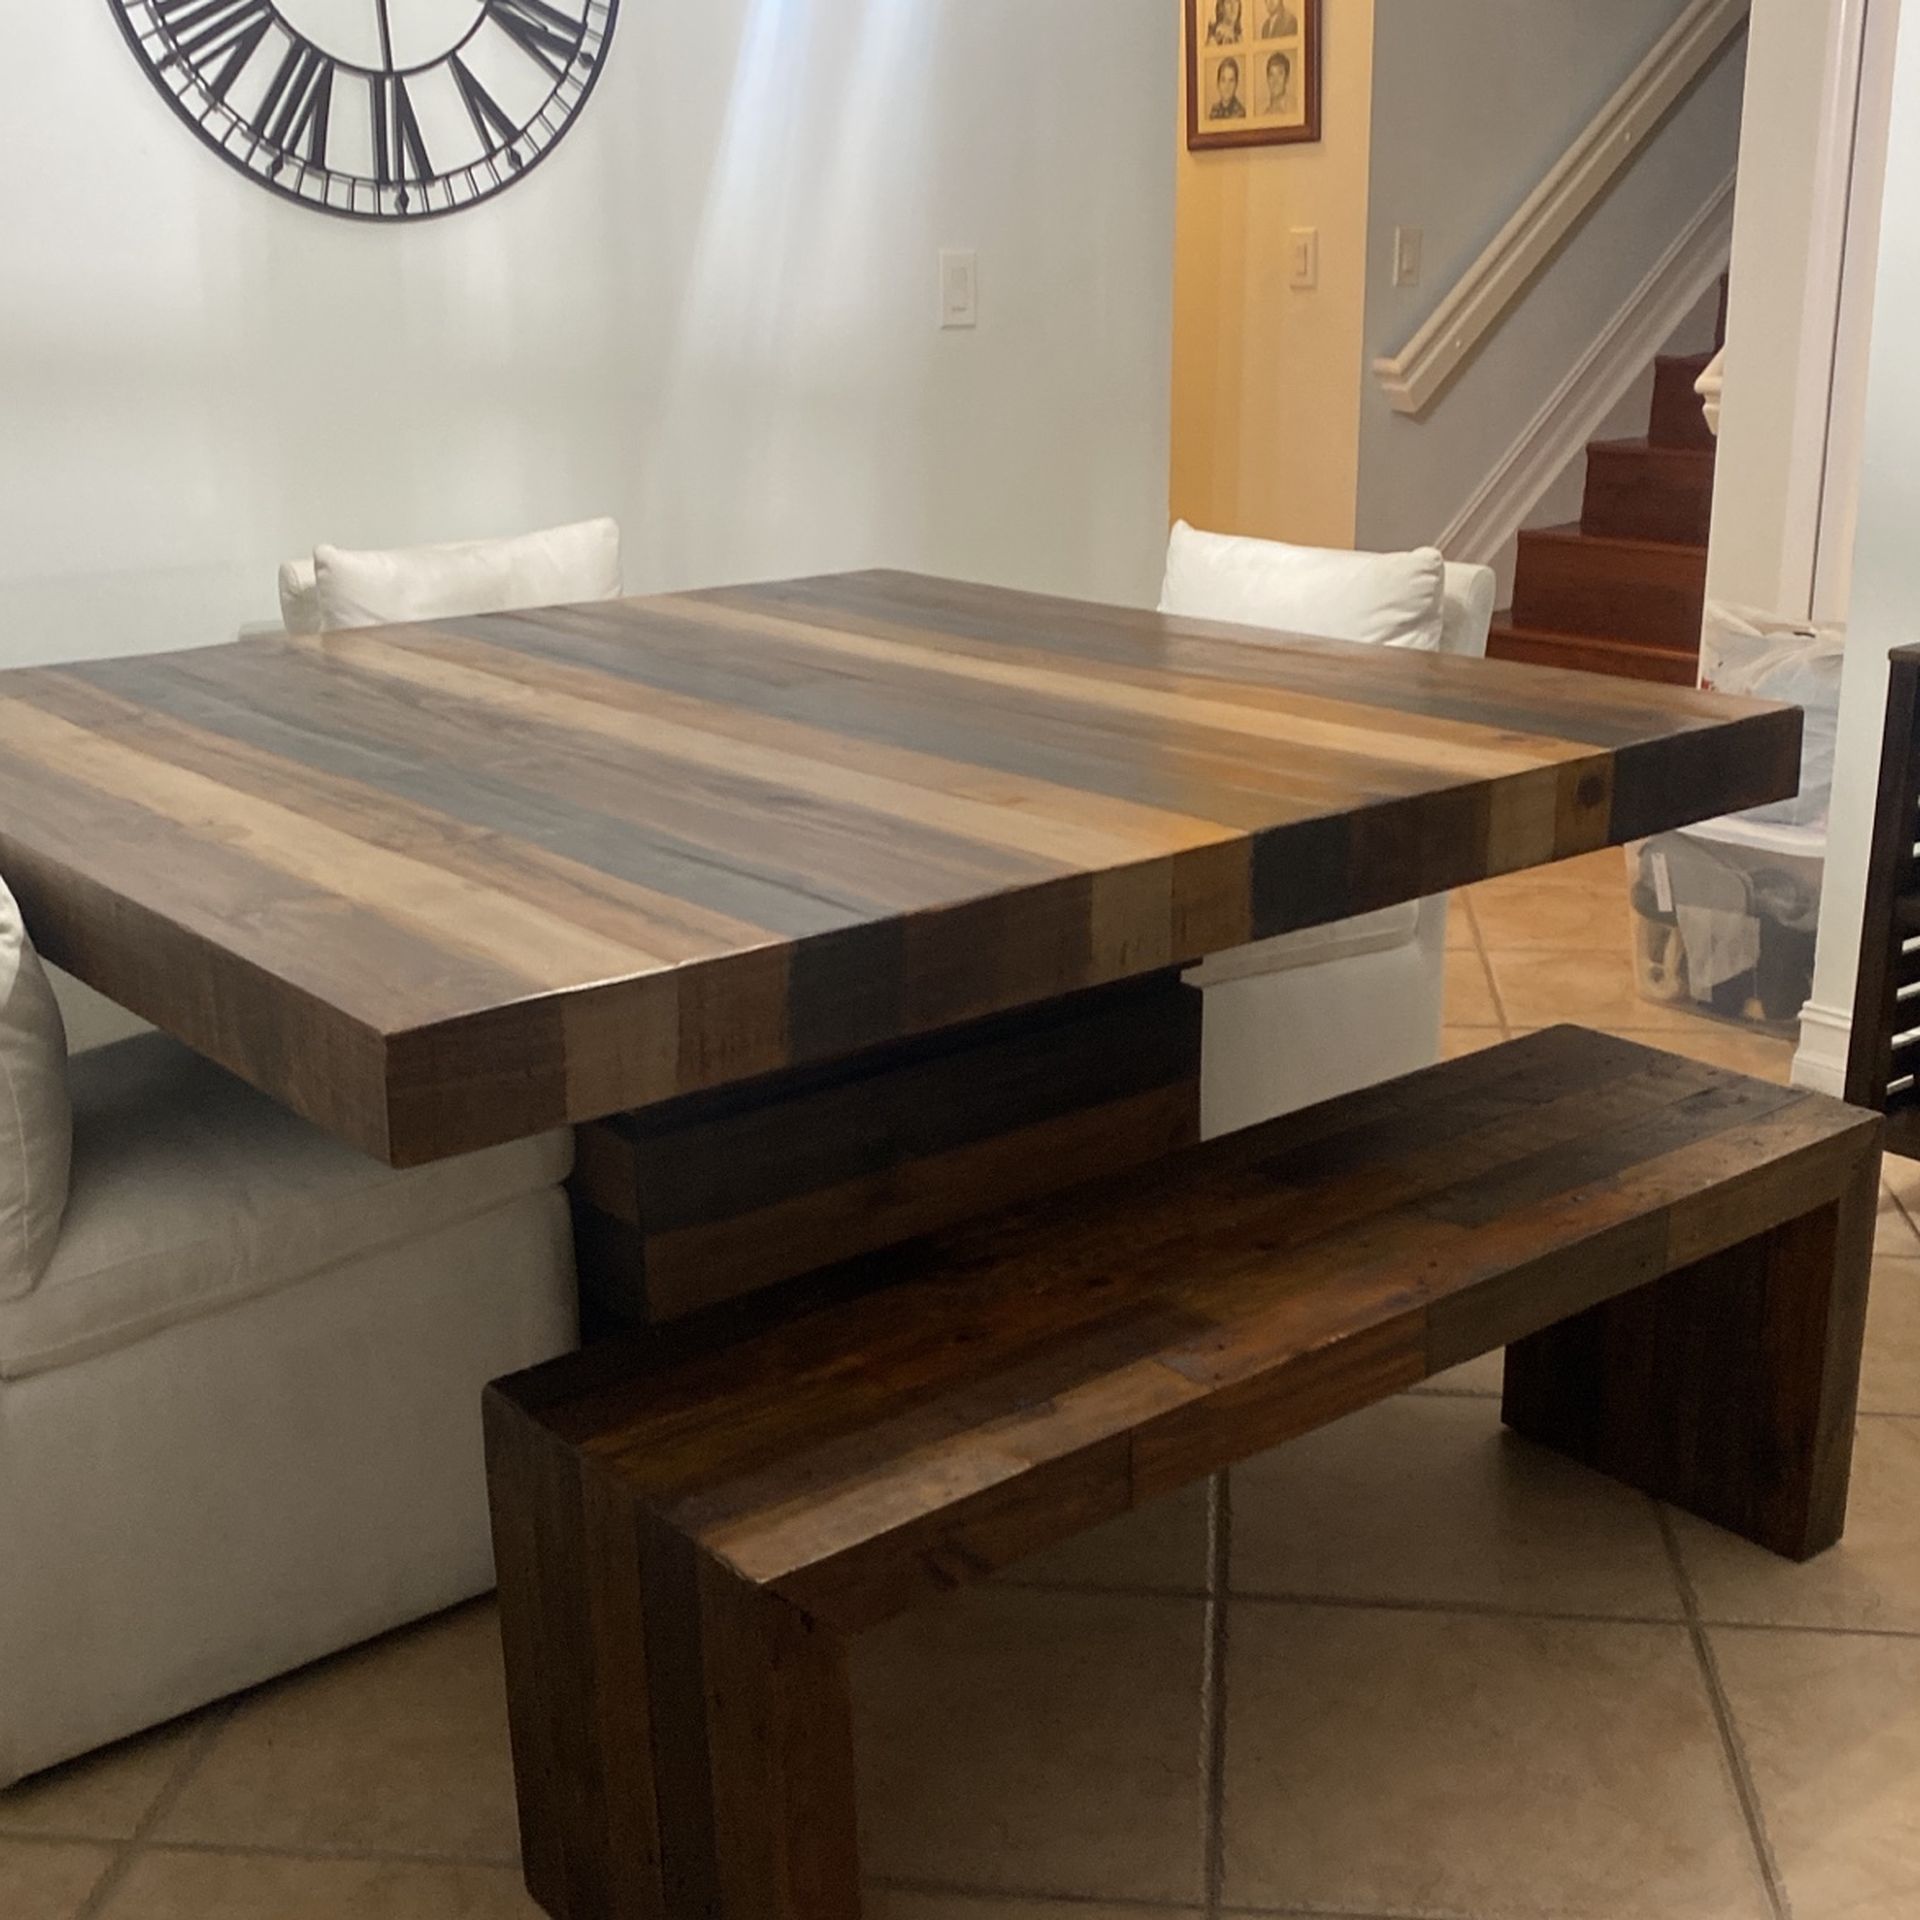 BEAUTIFUL WOOD SQUARE TABLE 